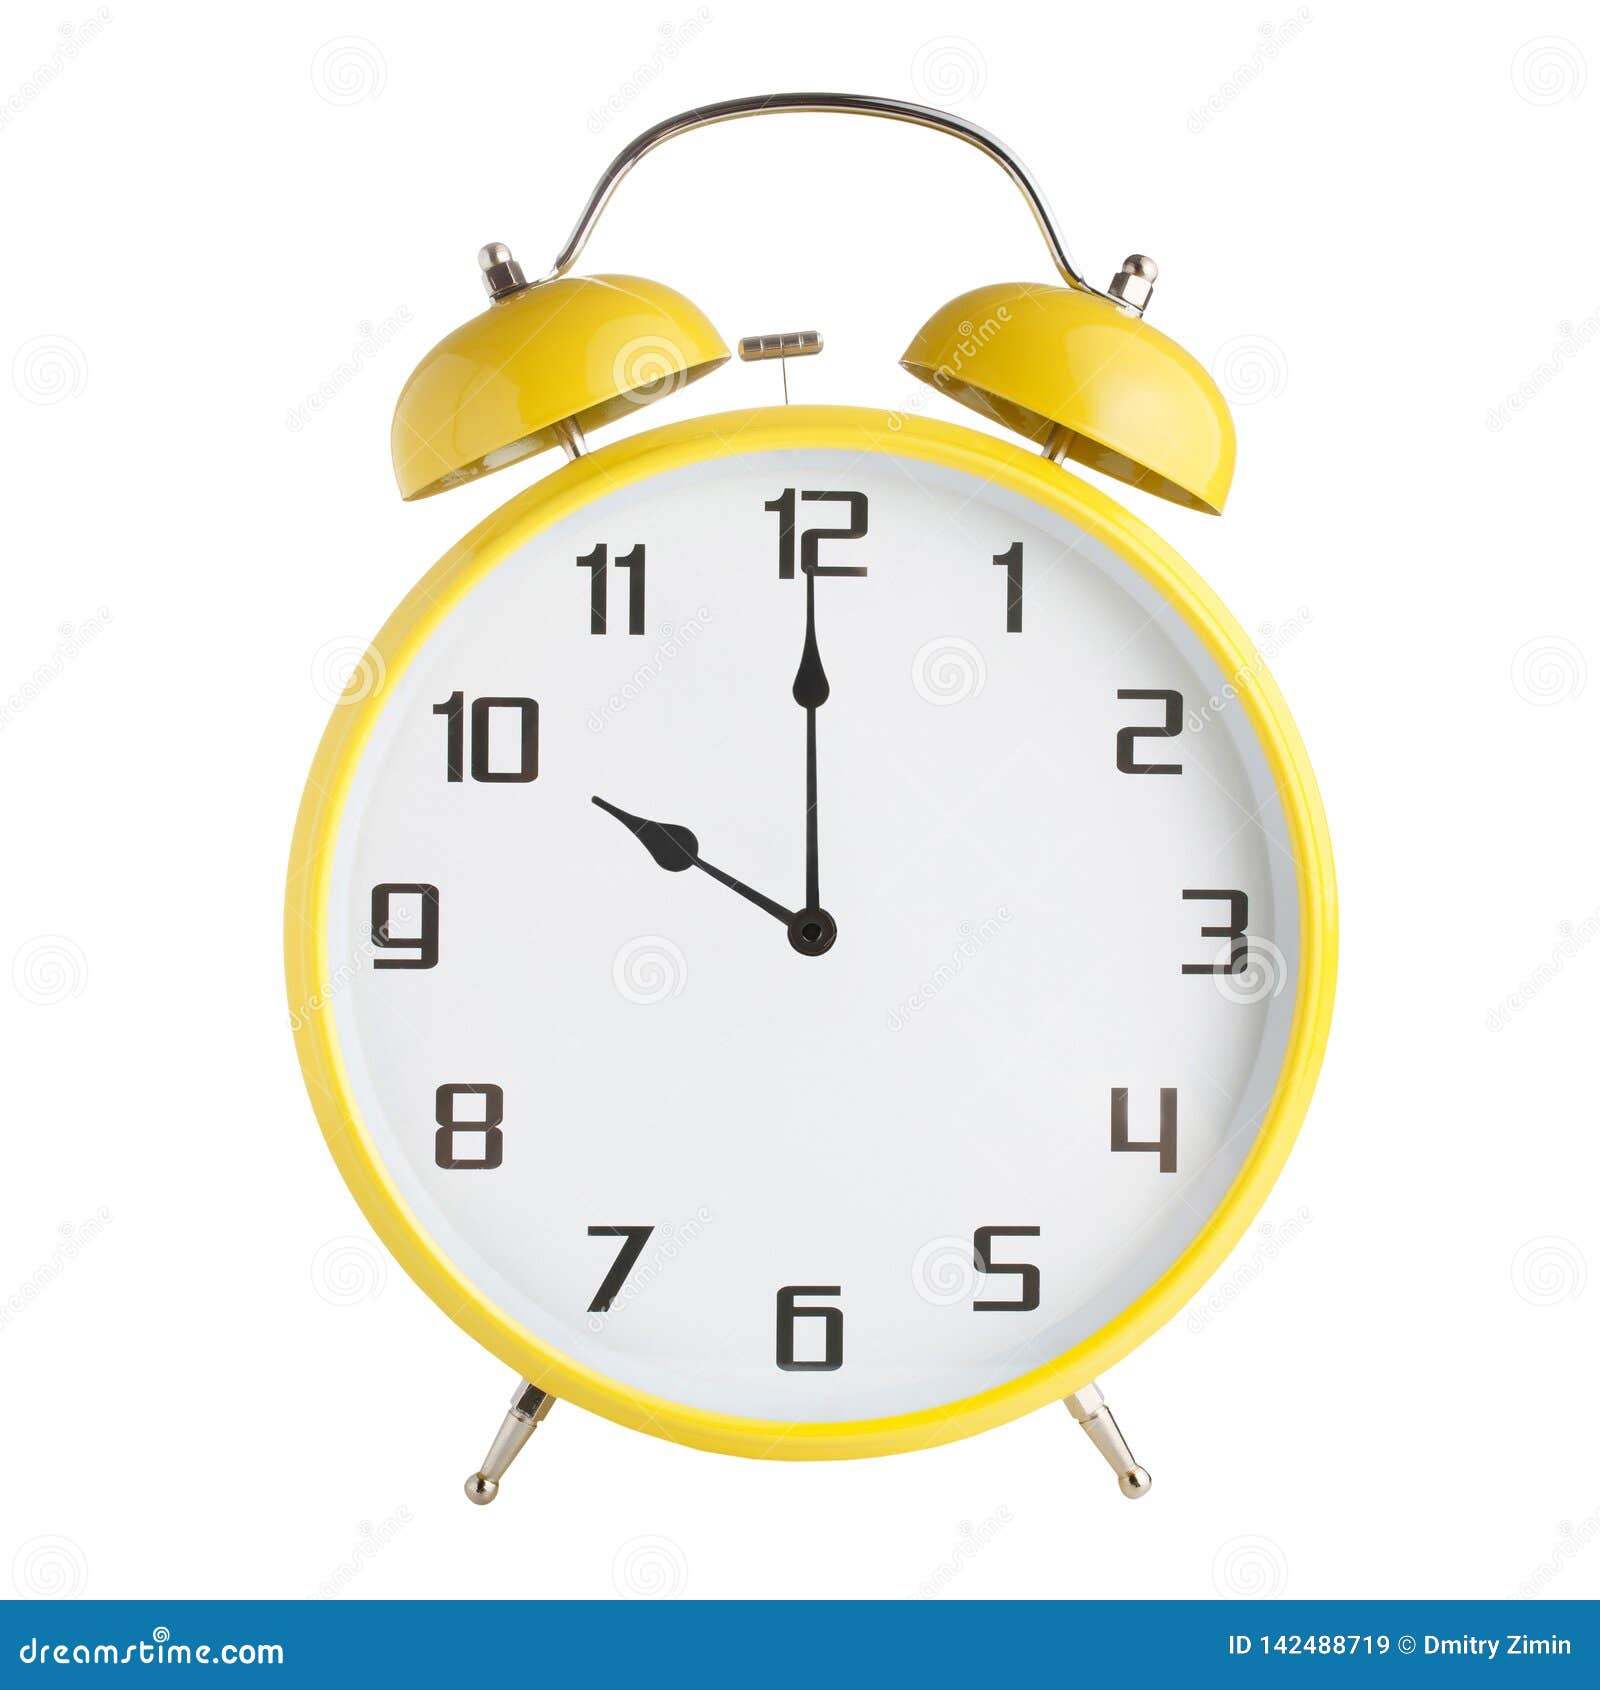 analog-alarm-clock-showing-ten-o-clock-10pm-or-10-am-isolated-on-white